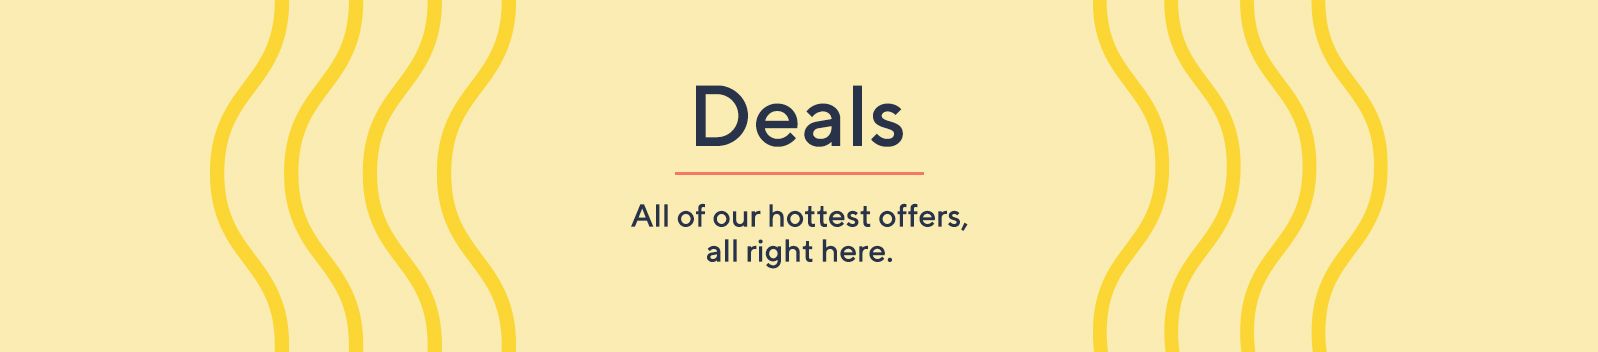 Deals.  All of our hottest offers, all right here.